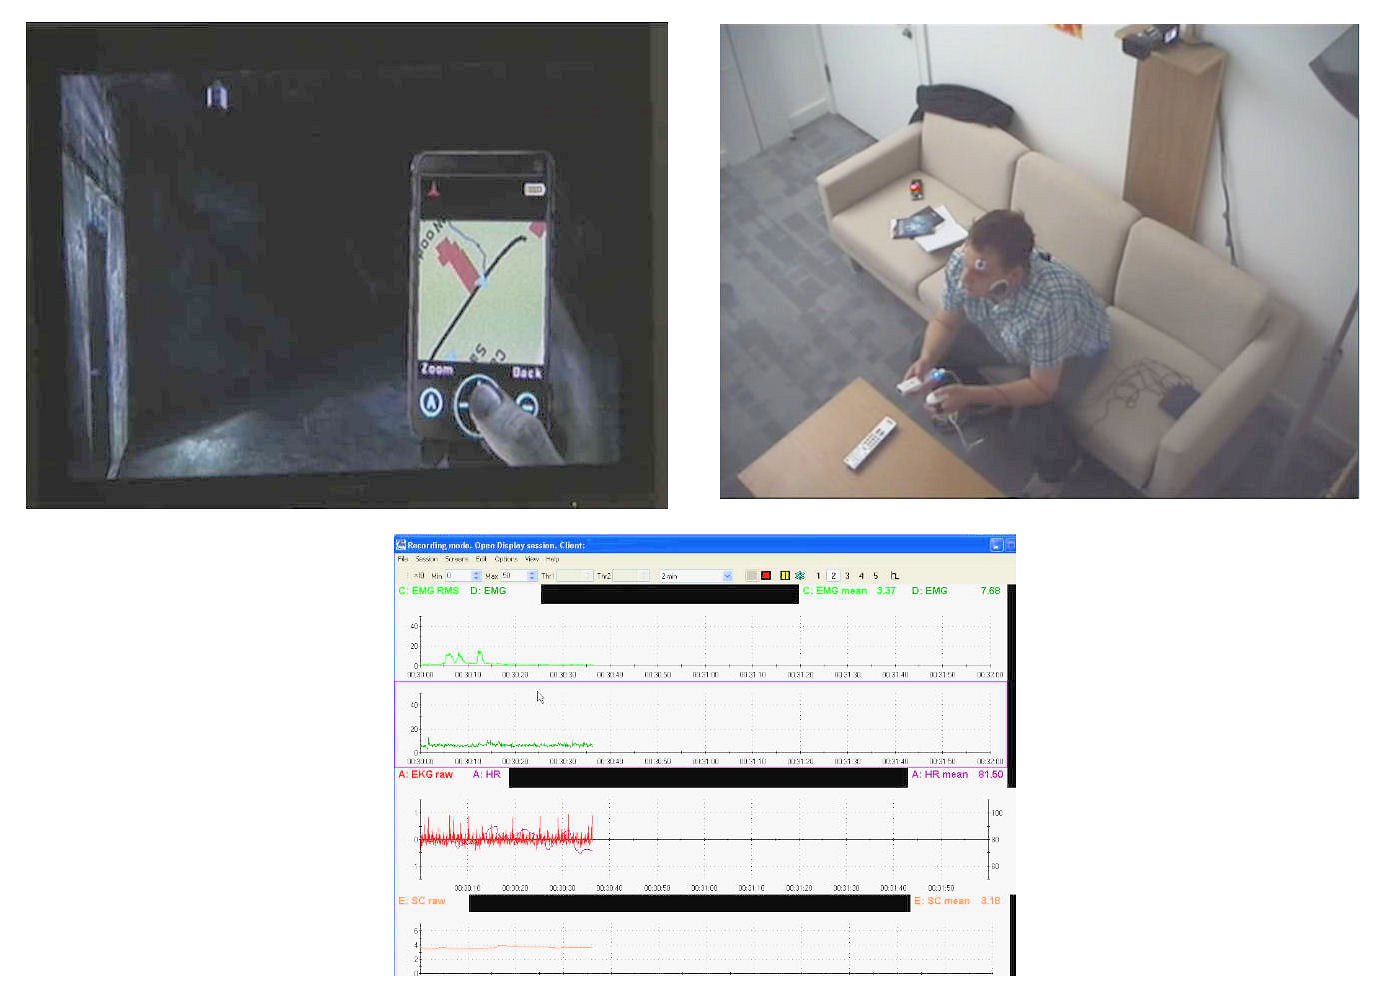 Video recordings of the game-play, the player, and the physiological readings (Case 1: Matt playing Silent Hill: Shattered Memories). 